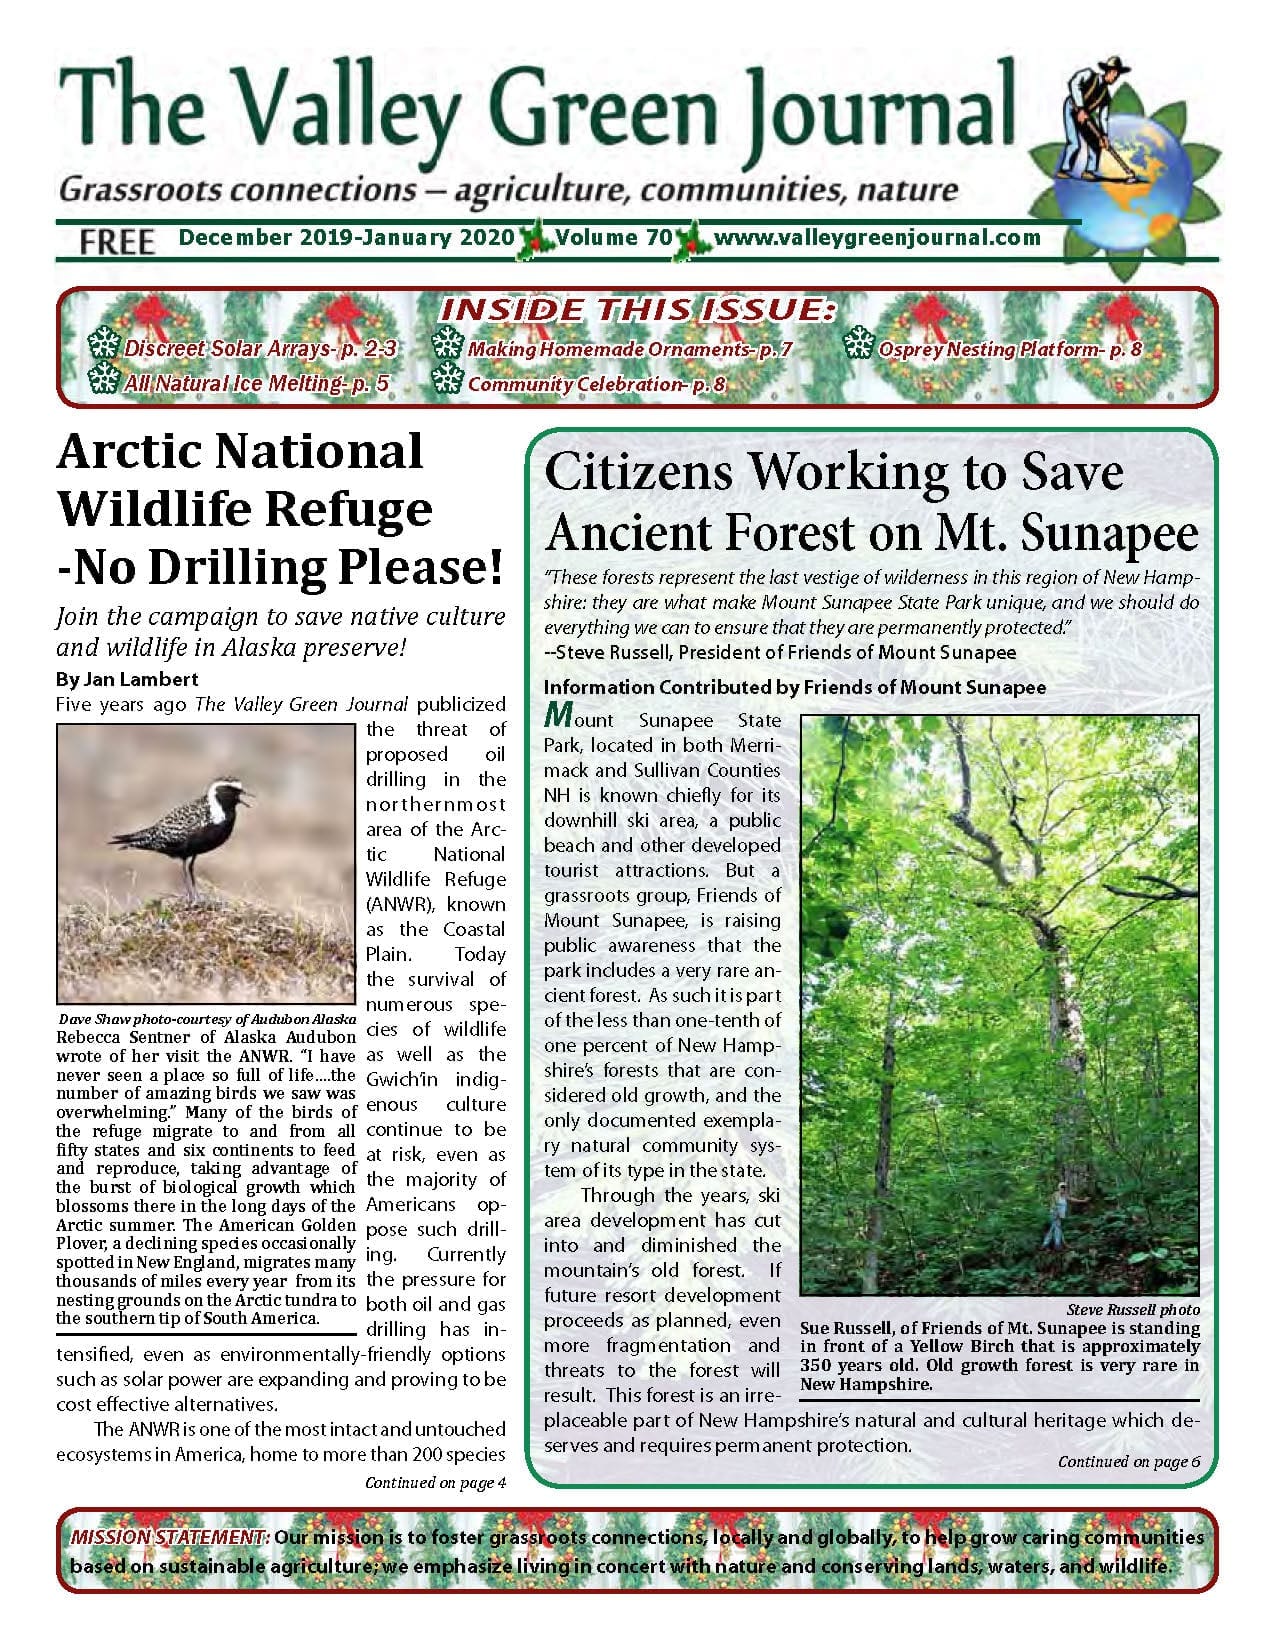 VGJ: Citizens work to protect ancient forest on Mt. Sunapee